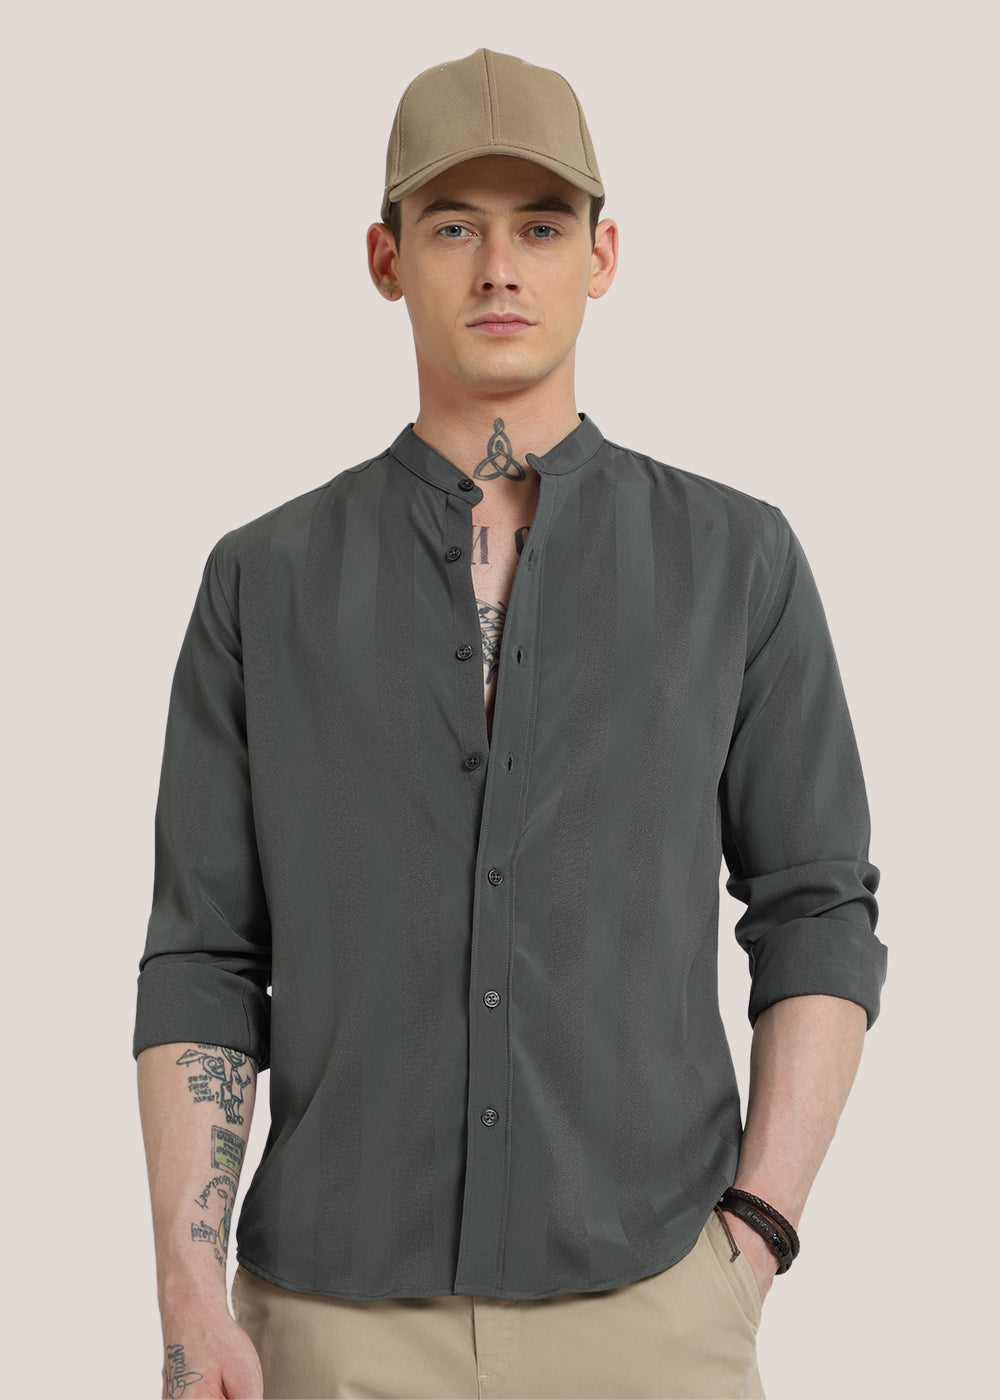 Stealth Grey Shein Patterned Shirt